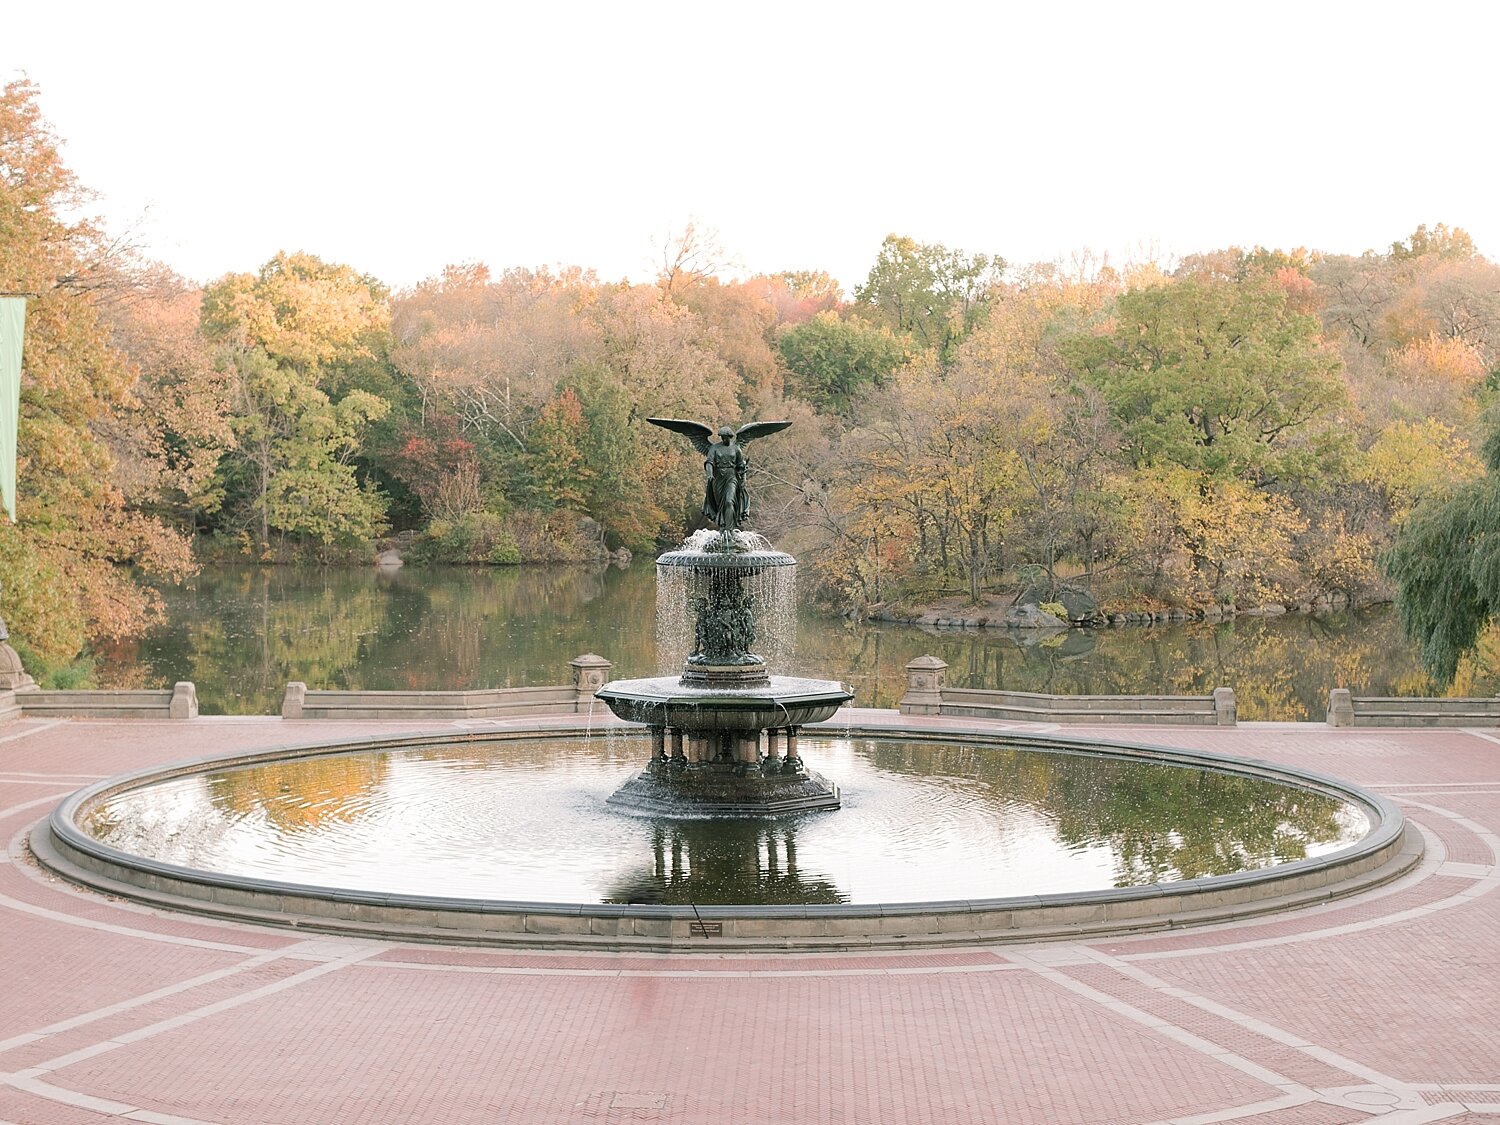 NYC Central Park Iconic Bethesda Fountain Photograph. 